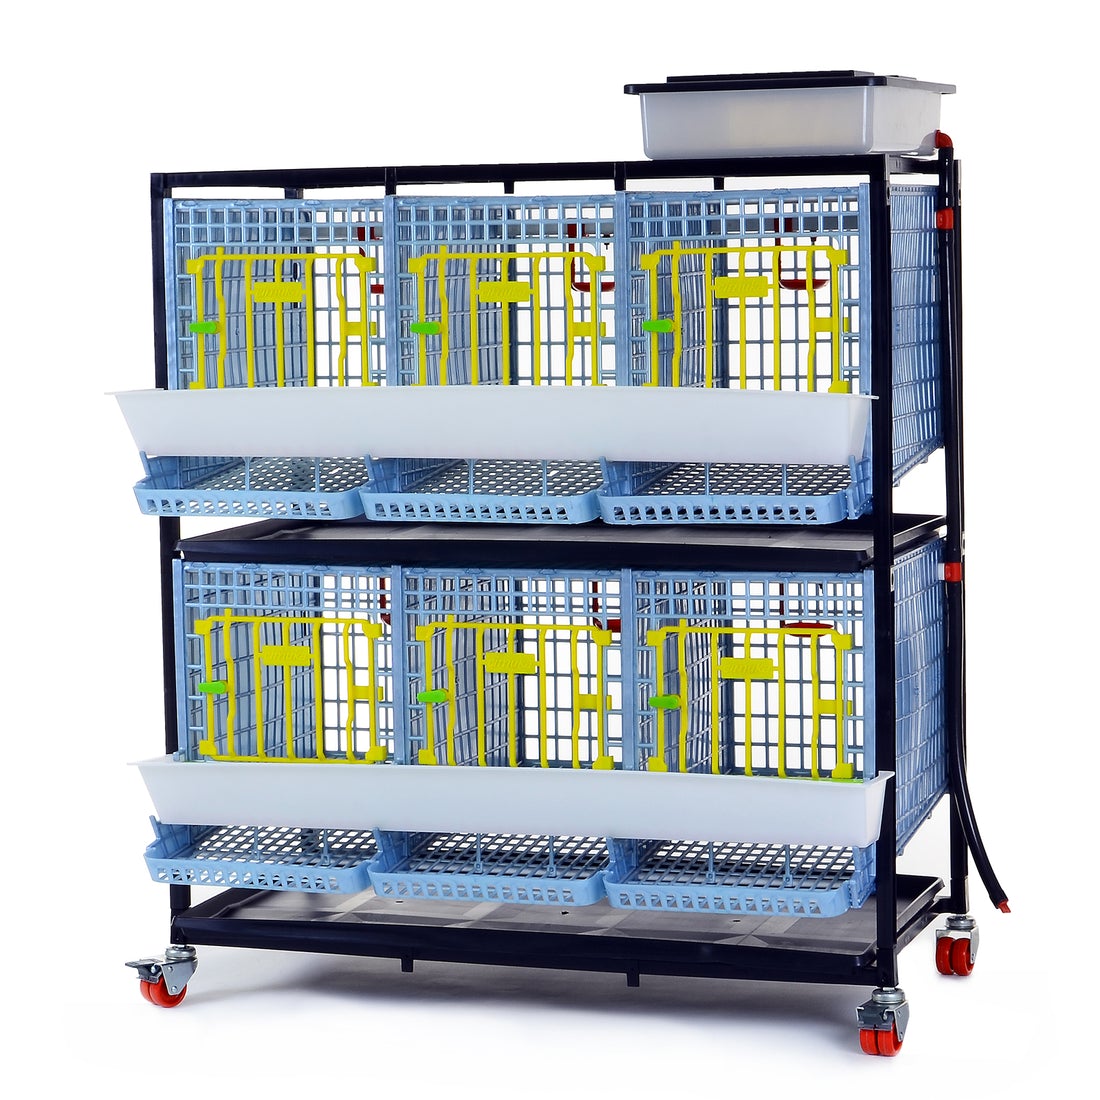 Hatching Time Cimuka. Partridge cage can be seen in image with feeder trough on front, roll-out egg tray, and water reservoir on top of cage connected to automatic drinker system.